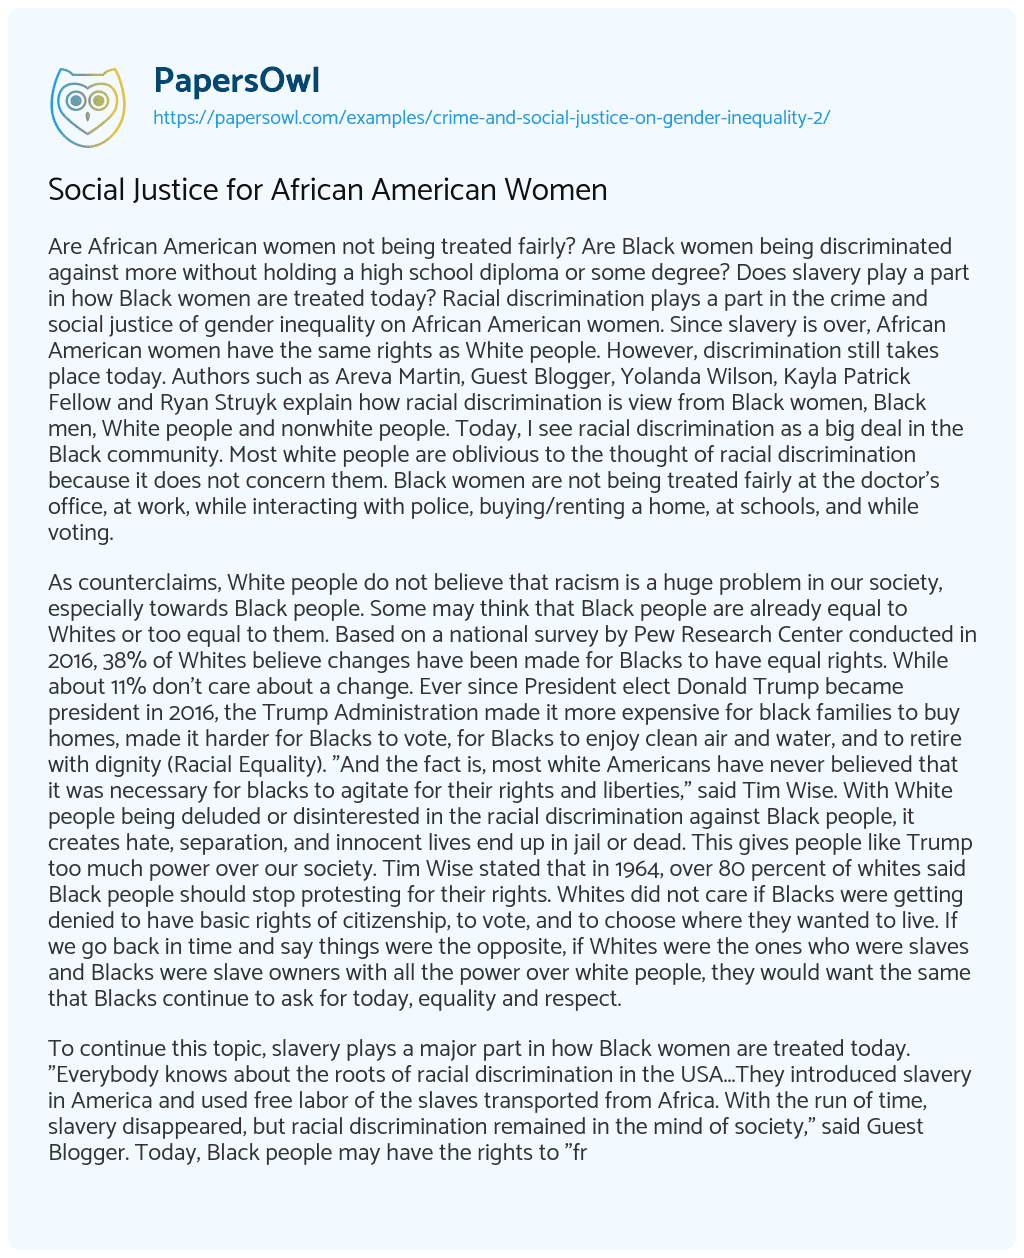 Essay on Social Justice for African American Women